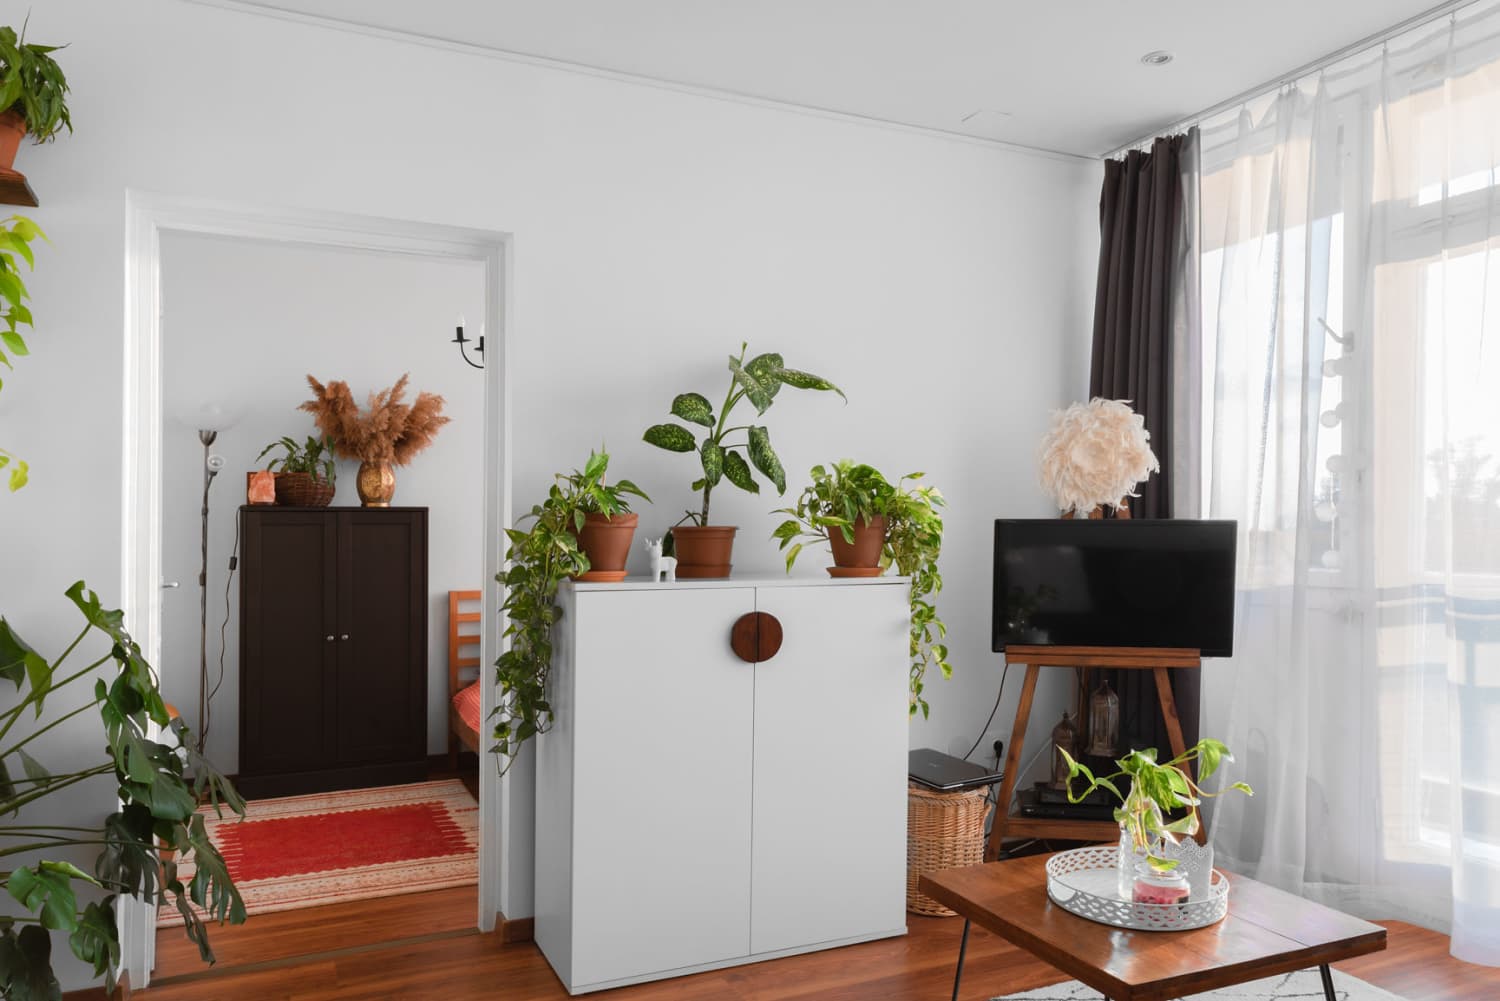 A 527-Square-Foot Condo Was Decorated Beautifully on a Budget